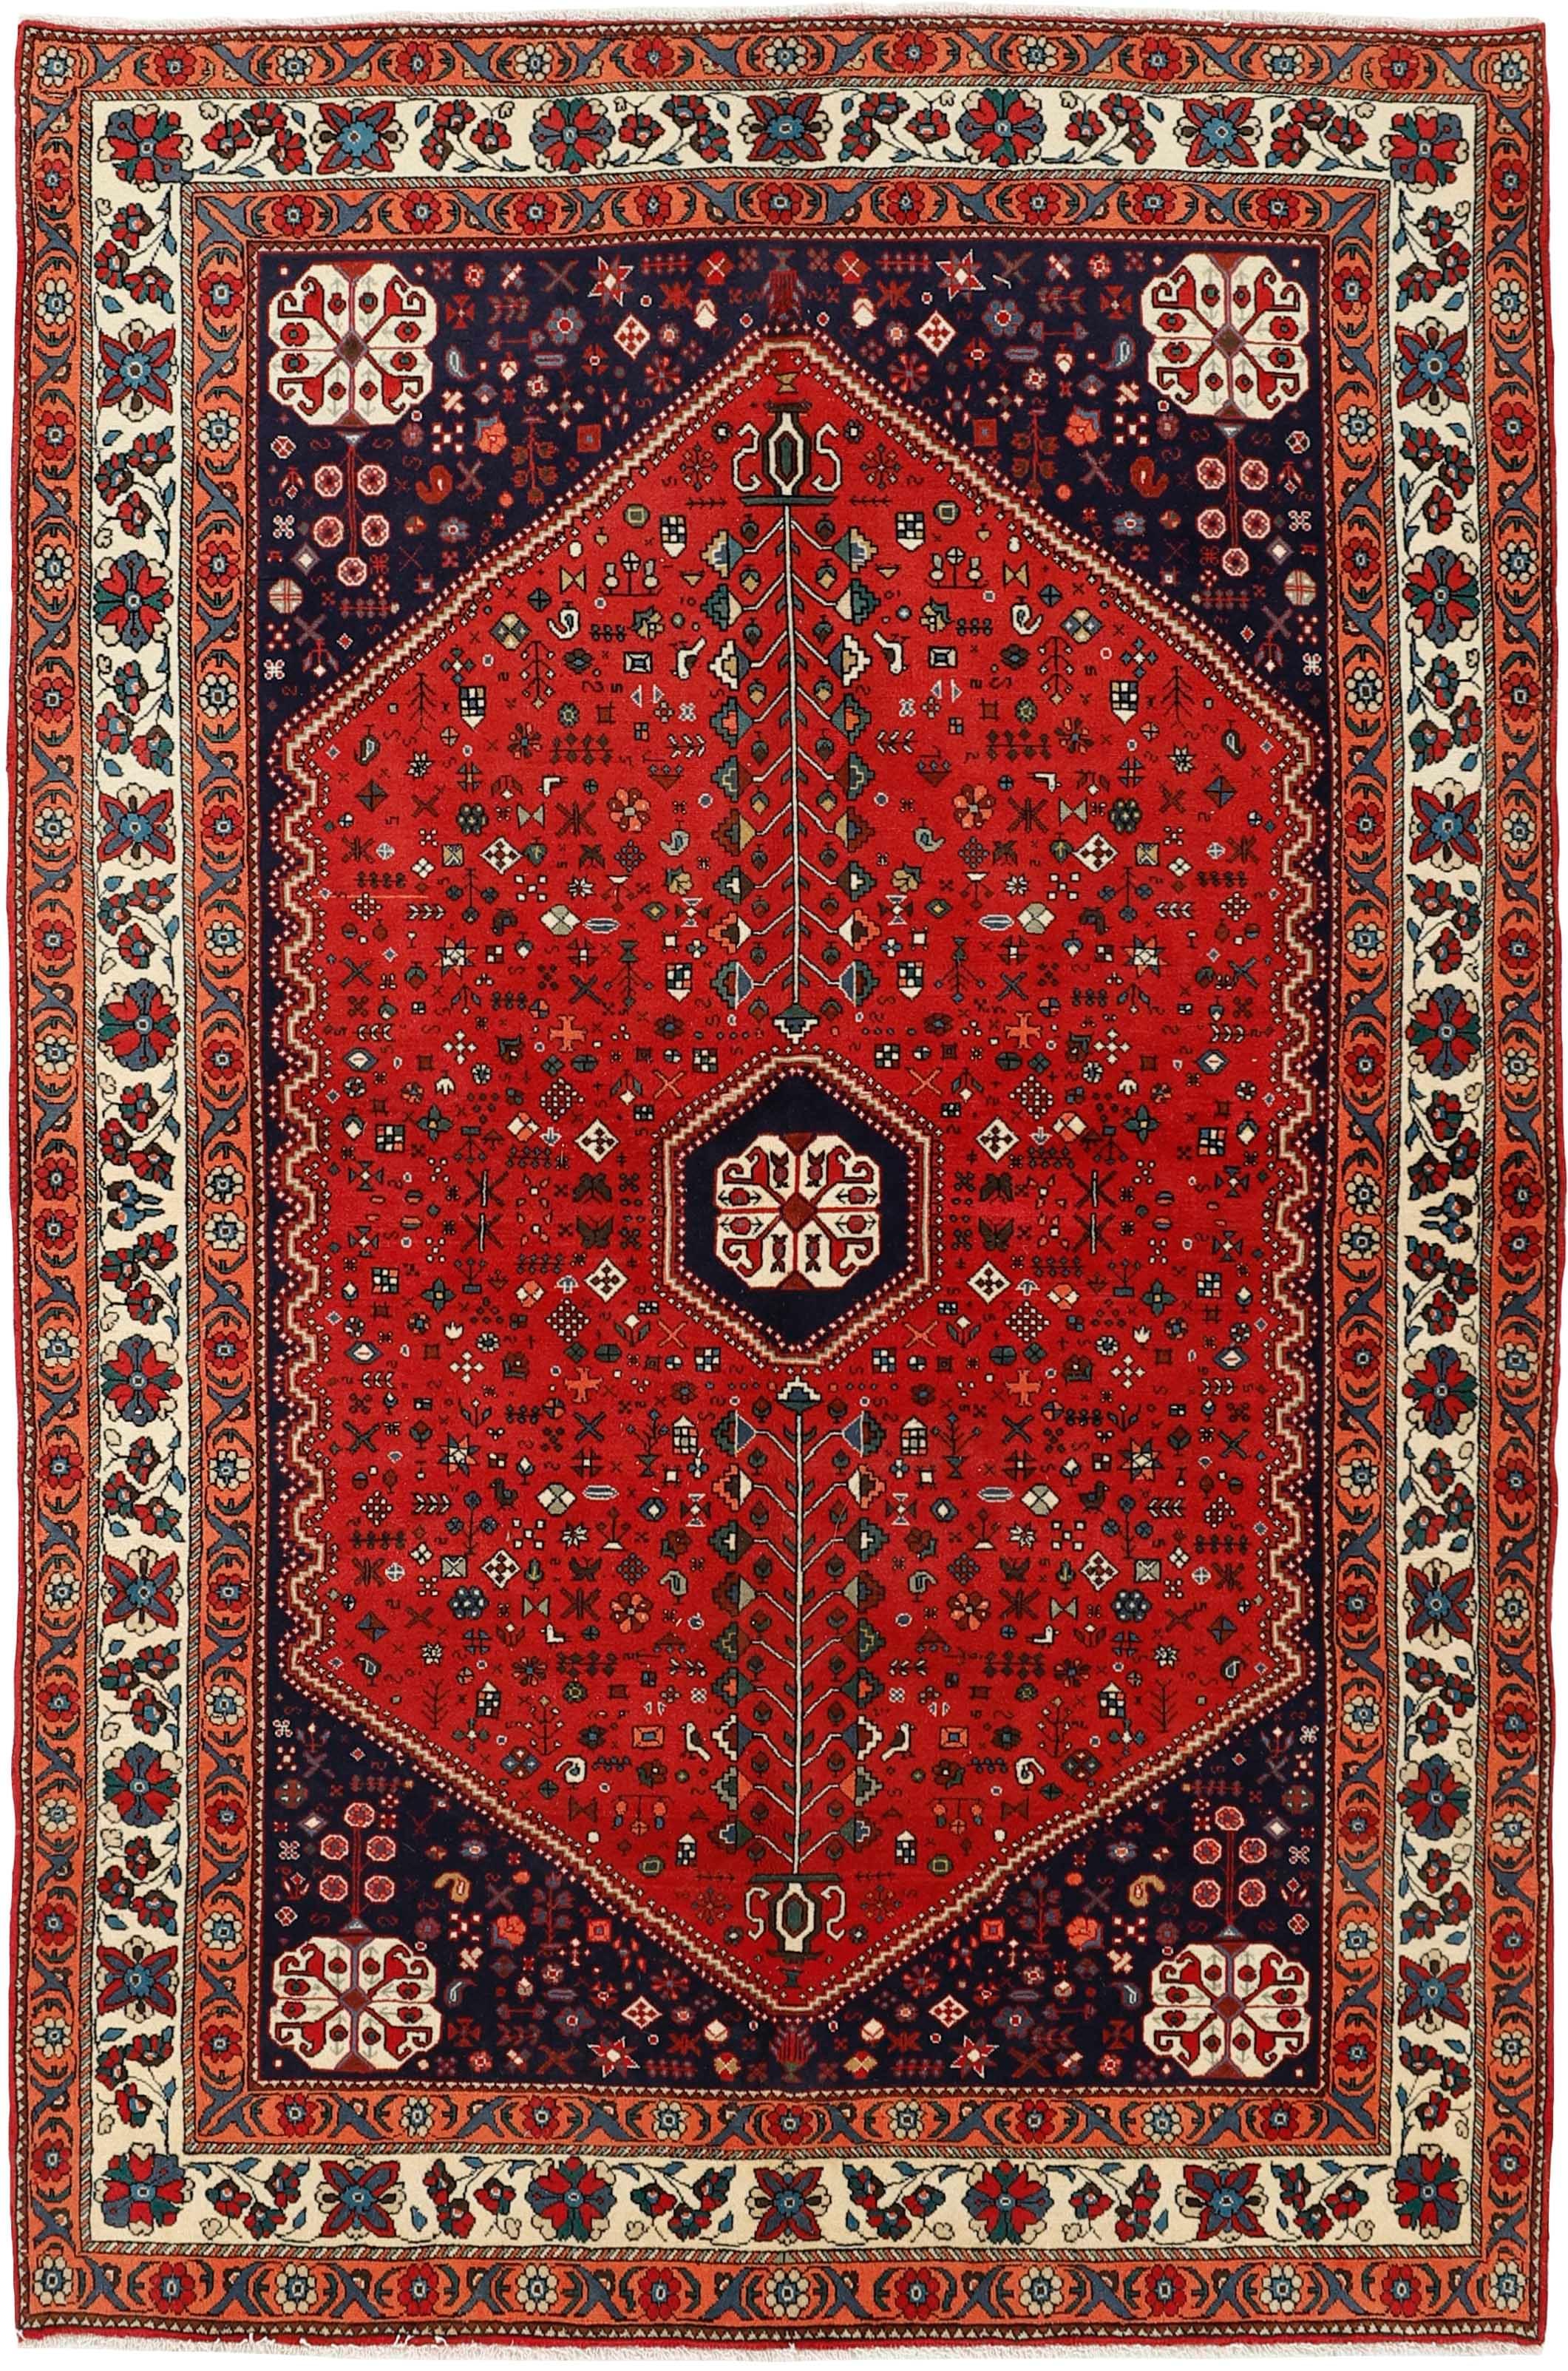 Authentic persian rug with traditional tribal geometric design in red, black & ivory